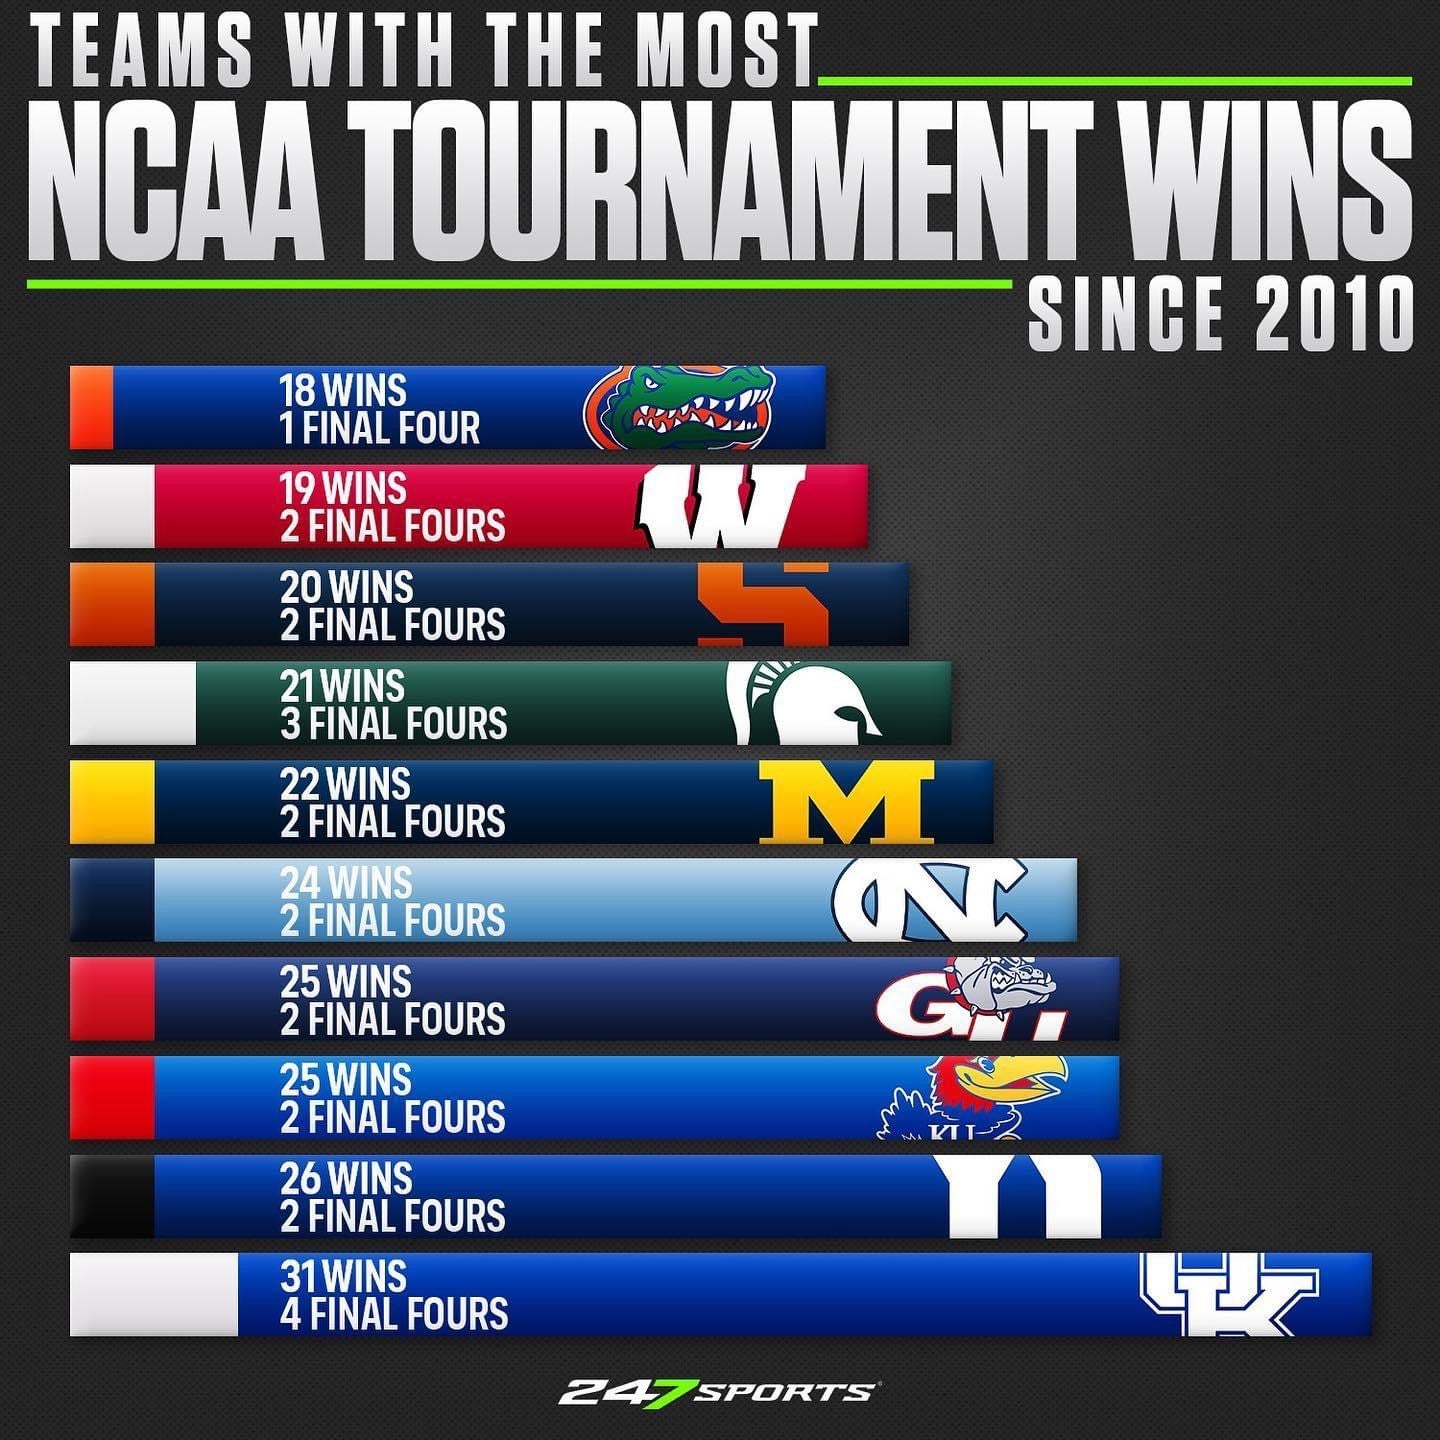 Teams with the most NCAA tournament wins since 2010